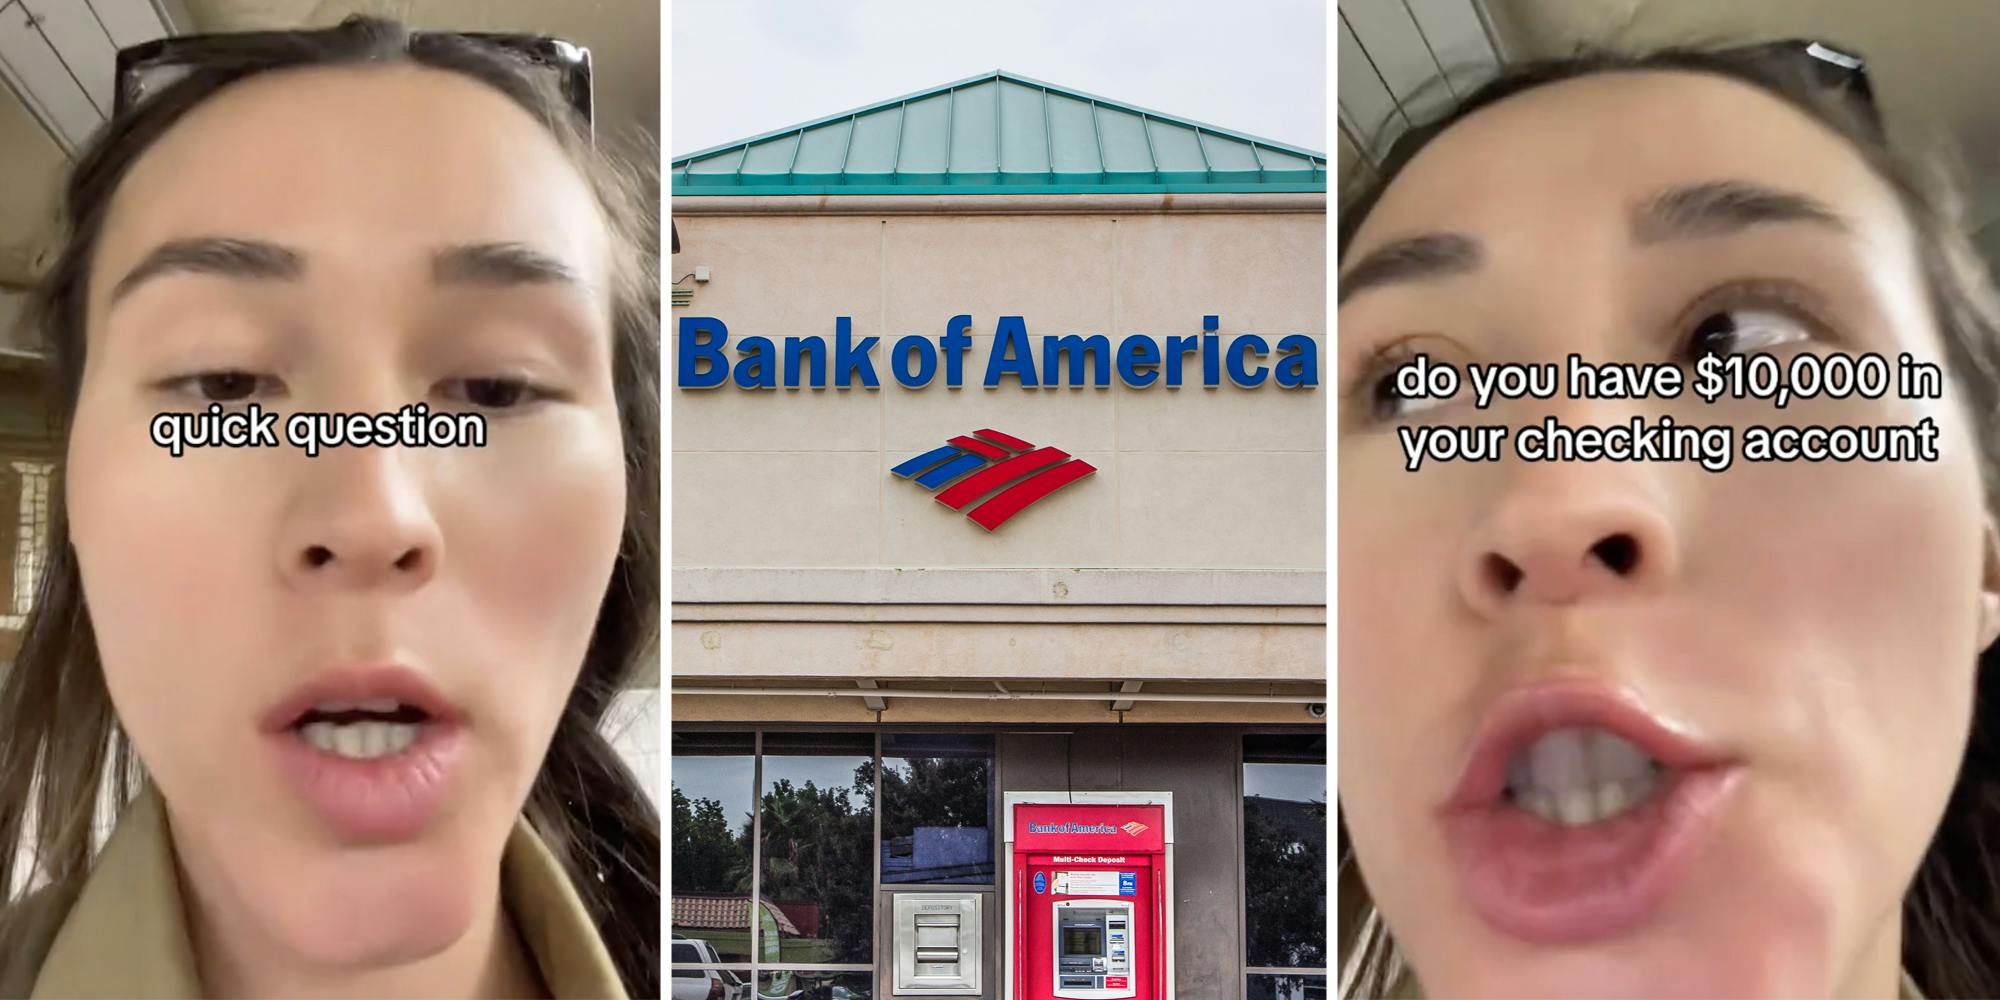 ‘Girl I got 10k in debt’: Bank of America customer says she’ll be charged a monthly fee if she doesn’t have $10,000 in her checking account thanks to new rule